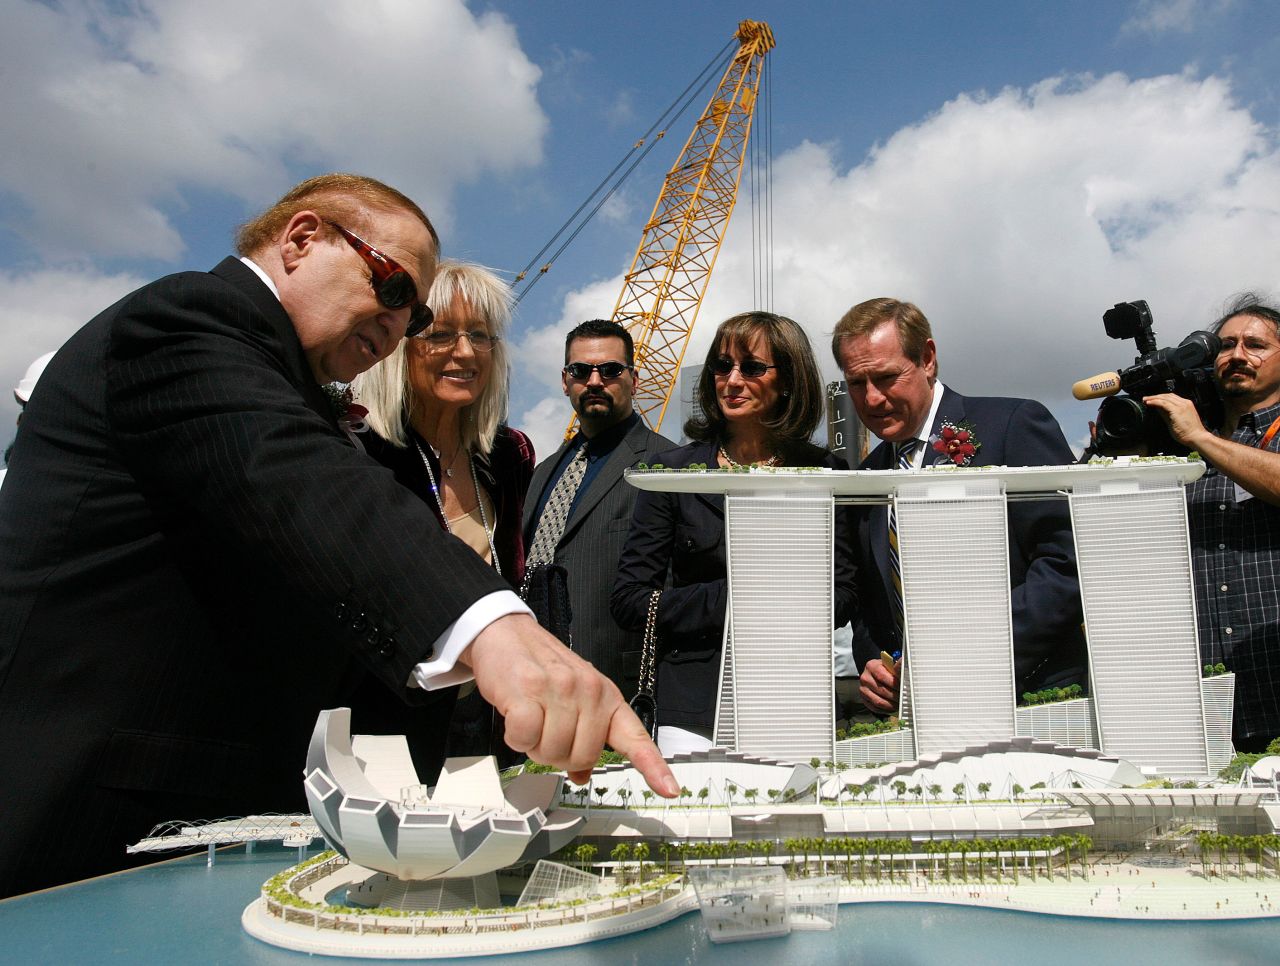 Adelson points at a model of the Marina Bay Sands casino during a groundbreaking ceremony in Singapore in 2007.